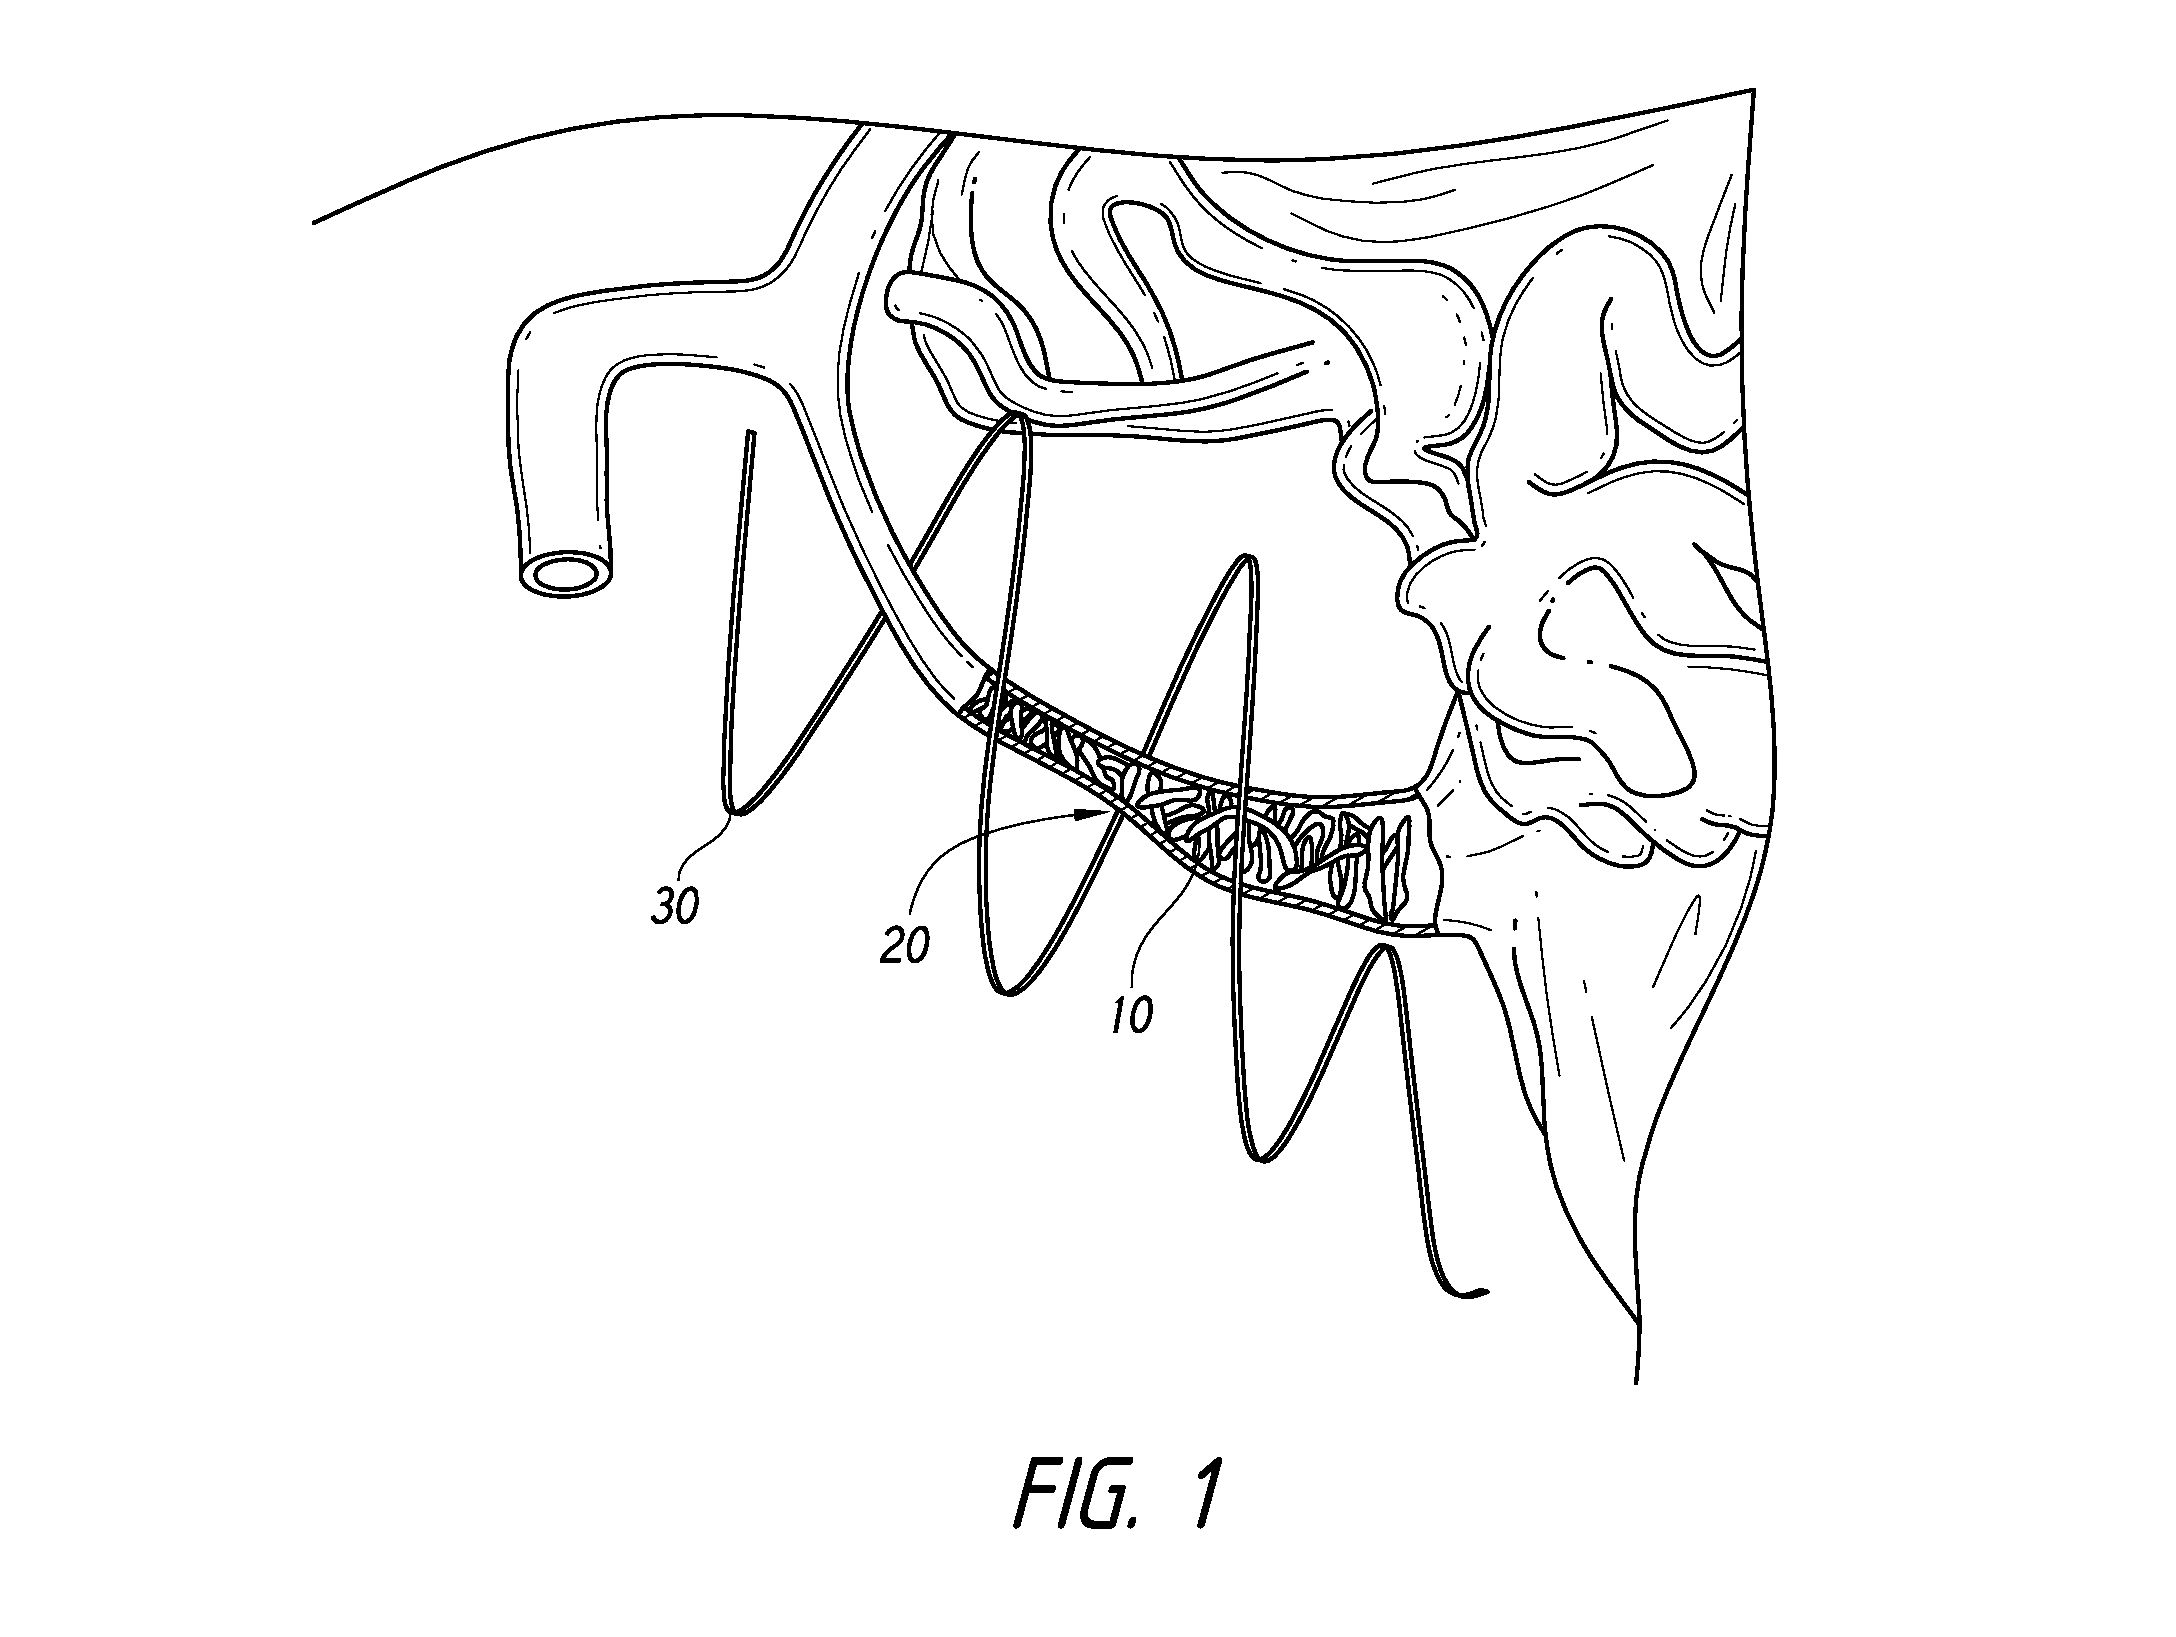 Methods and apparatuses for blood vessel occlusion